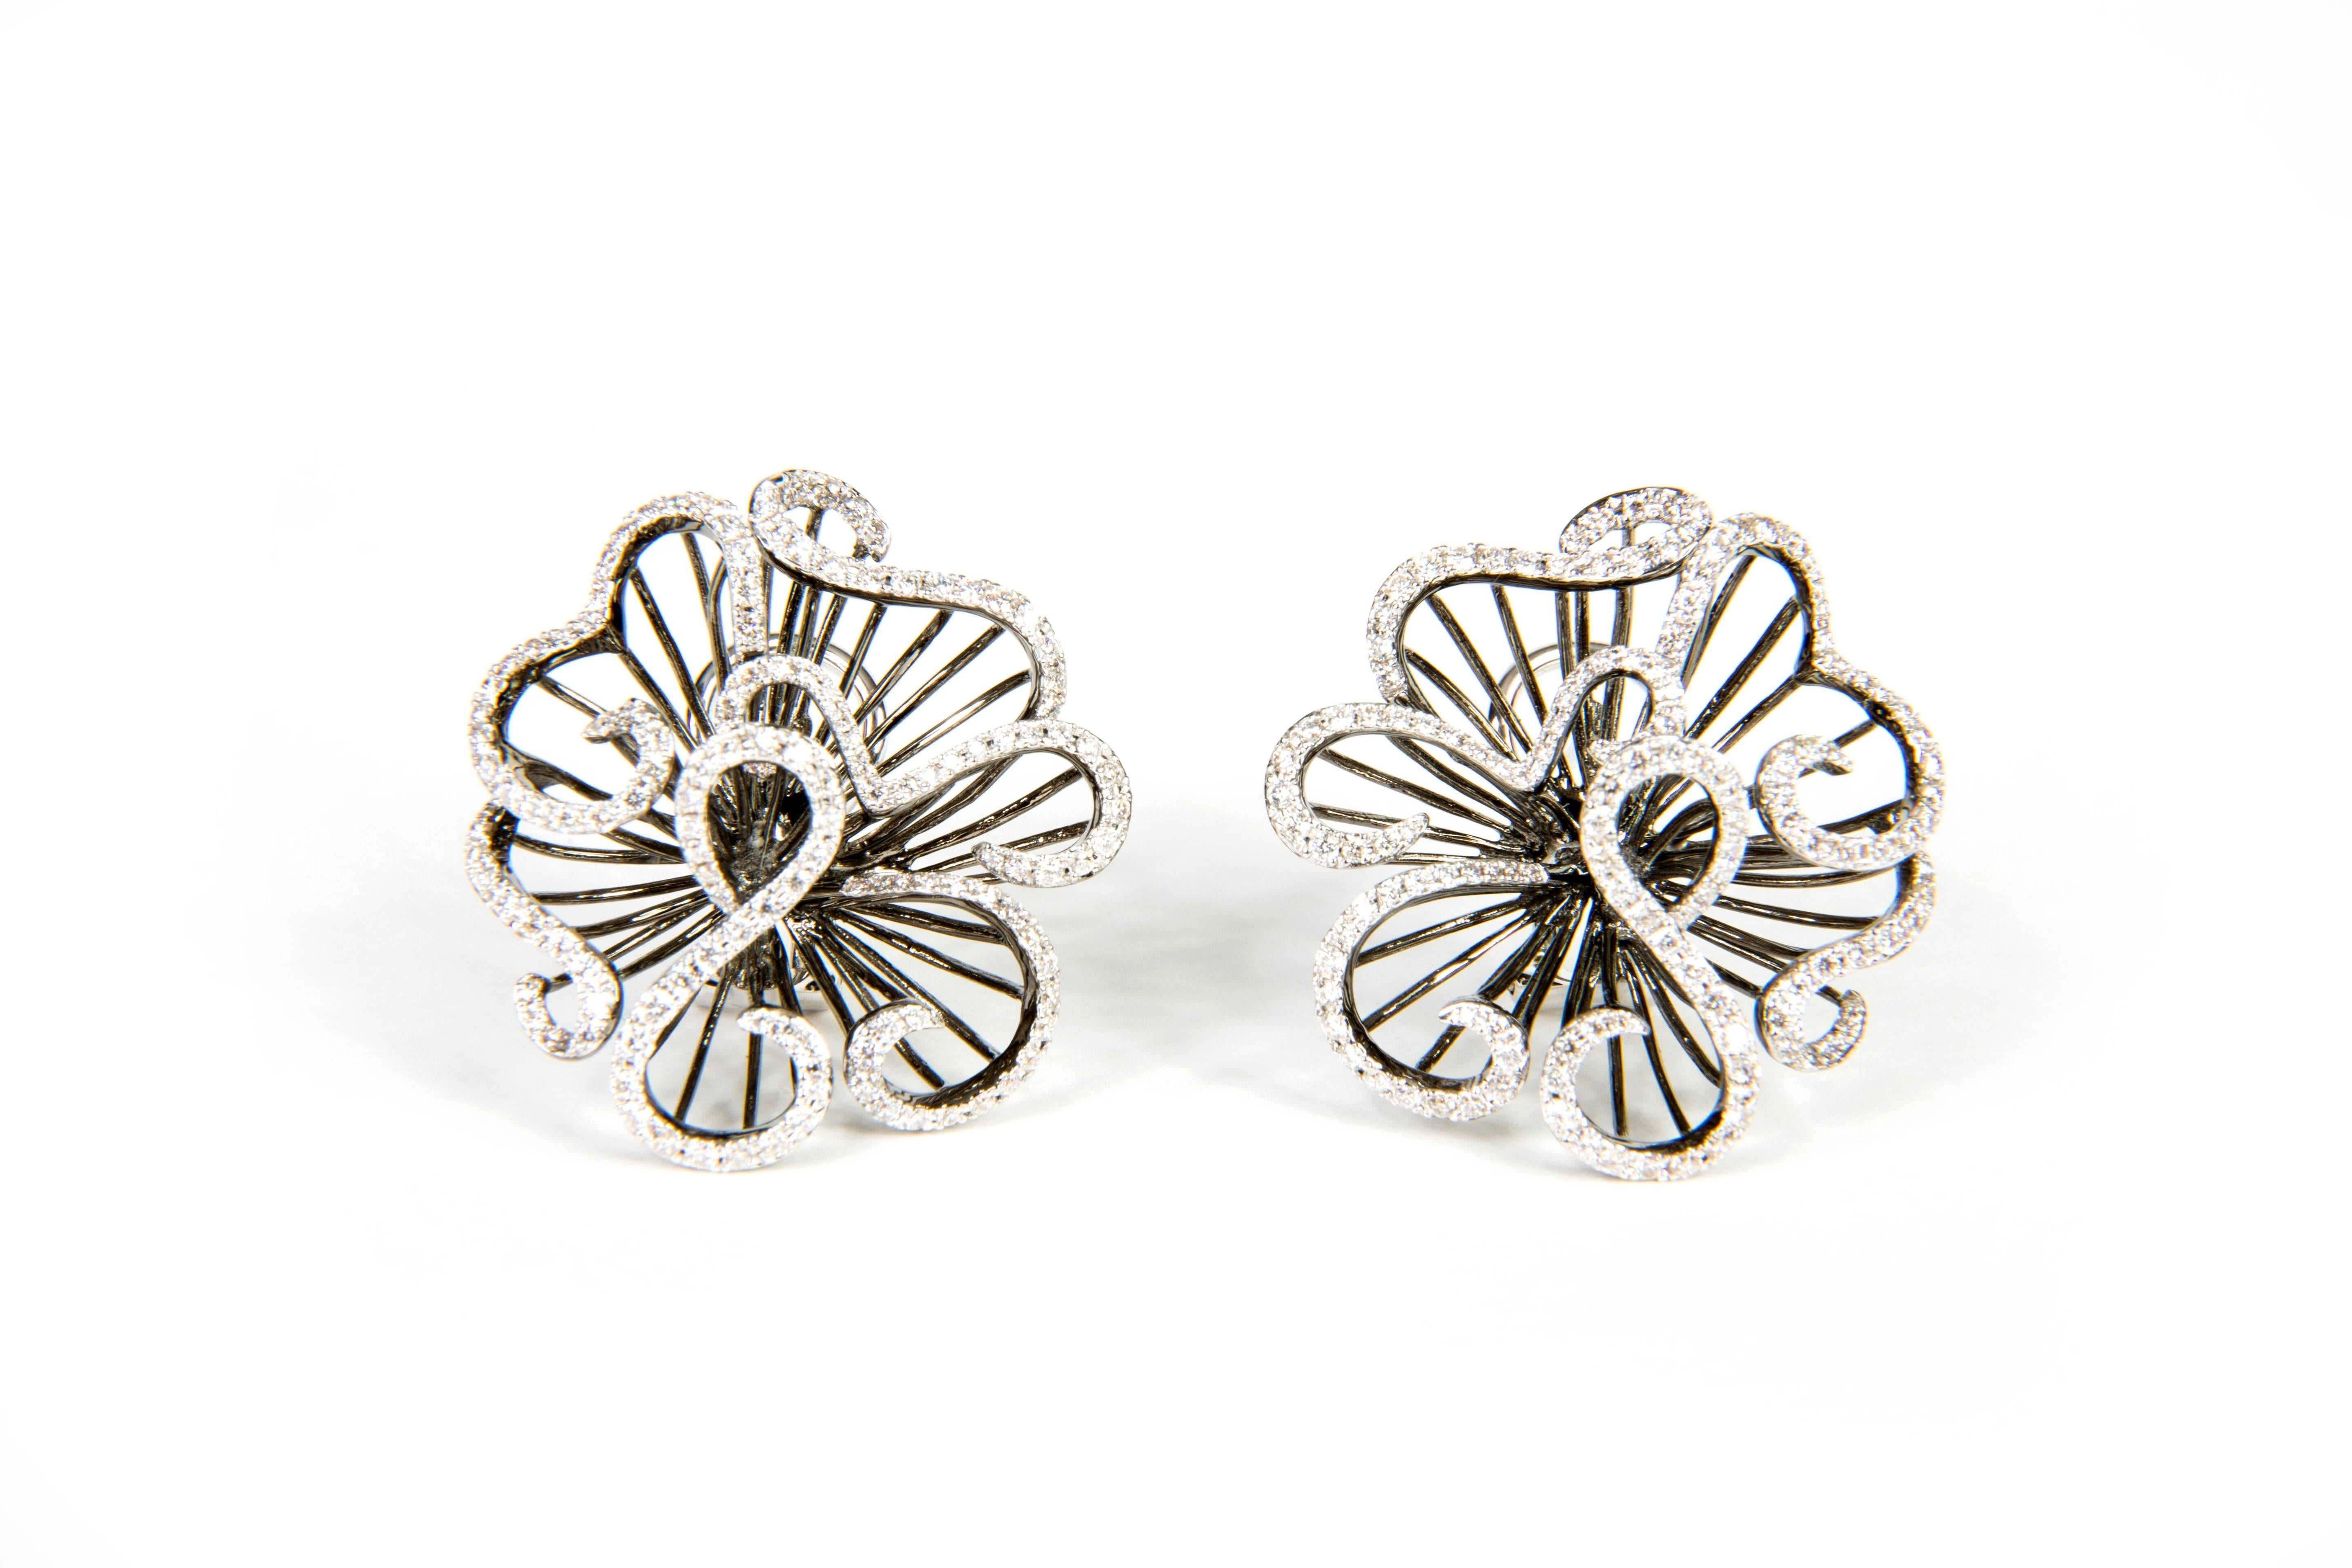 Diamond Flower Earrings 
white diamonds 1.01 cts H/Si
black diamonds 0.91 cts
18k whitegold

earrings come with clips and studs/ either can be removed upon request without charge